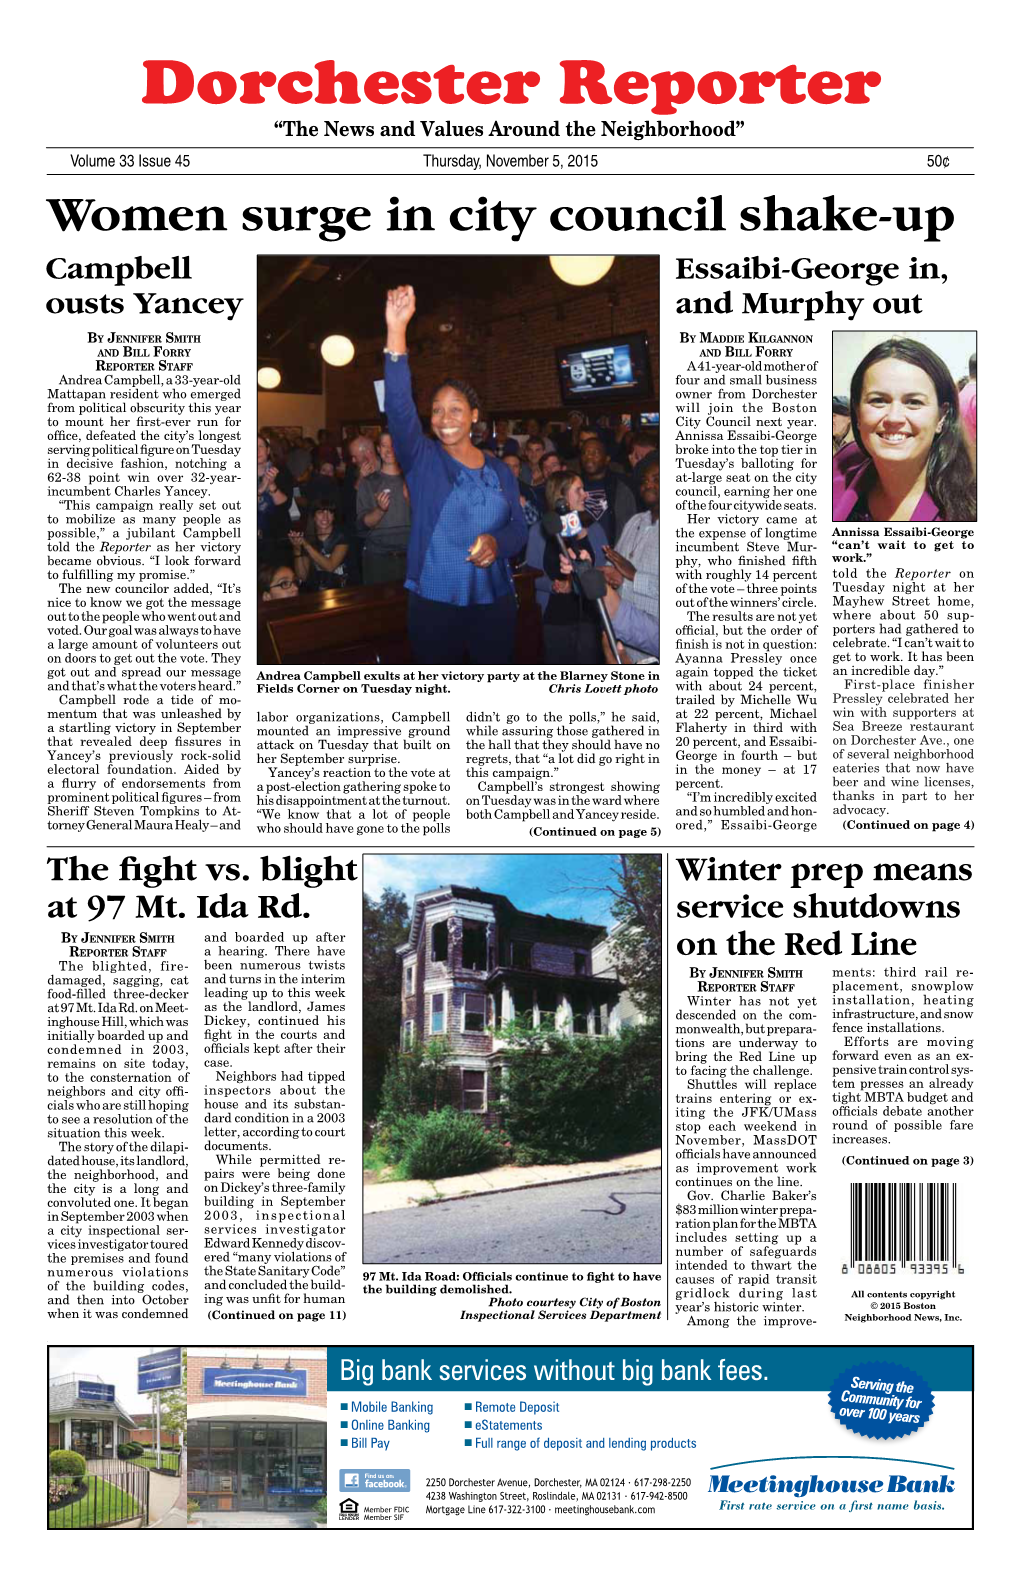 Dorchester Reporter “The News and Values Around the Neighborhood”